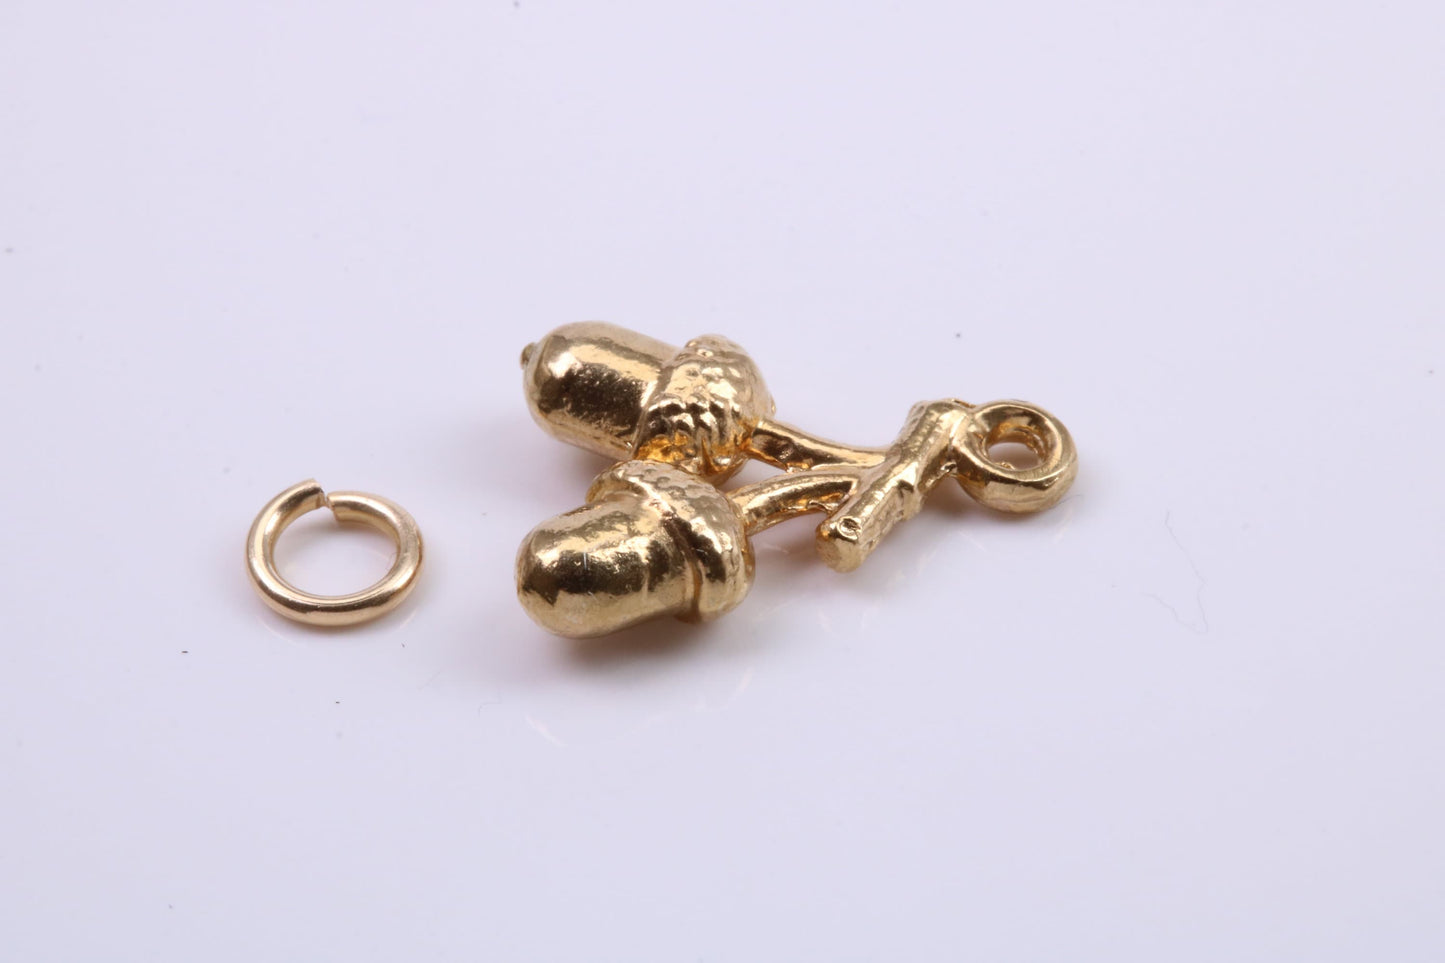 Acorns Charm, Traditional Charm, Made from Solid 9ct Yellow Gold, British Hallmarked, Complete with Attachment Link